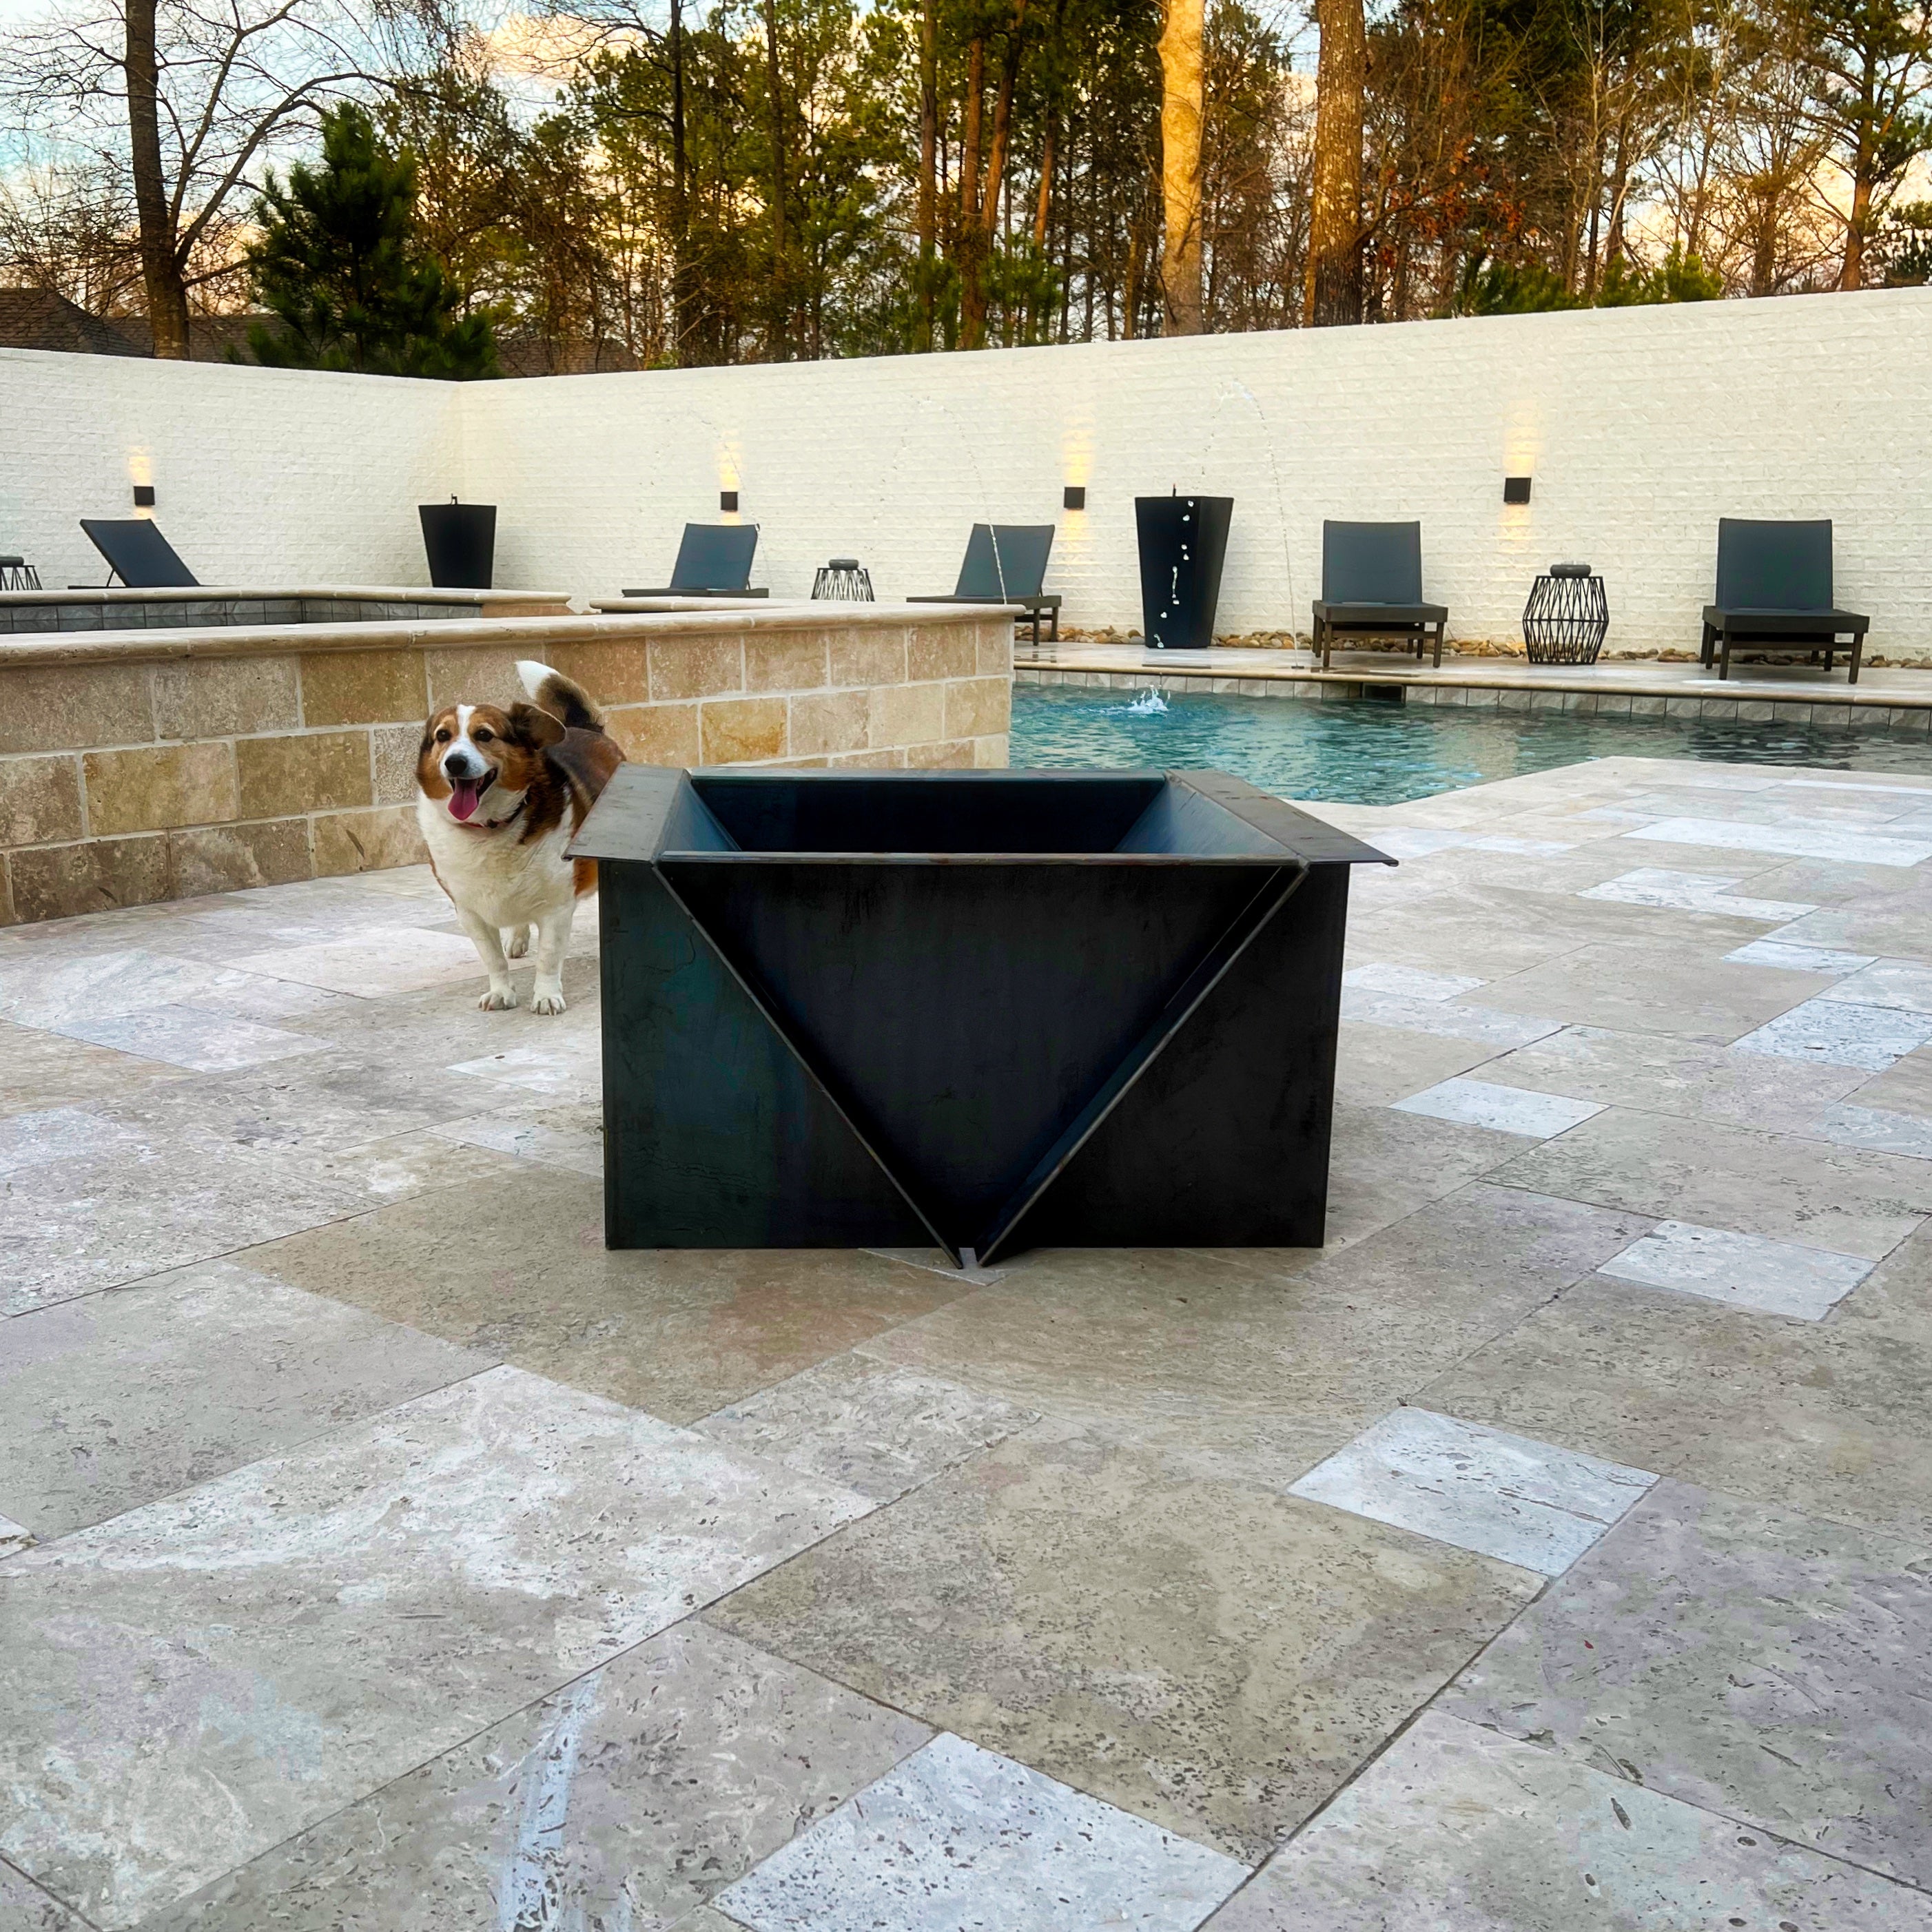 The Edge Right Fire Pit | Modern Steel Design | Precision Built | Long Burning